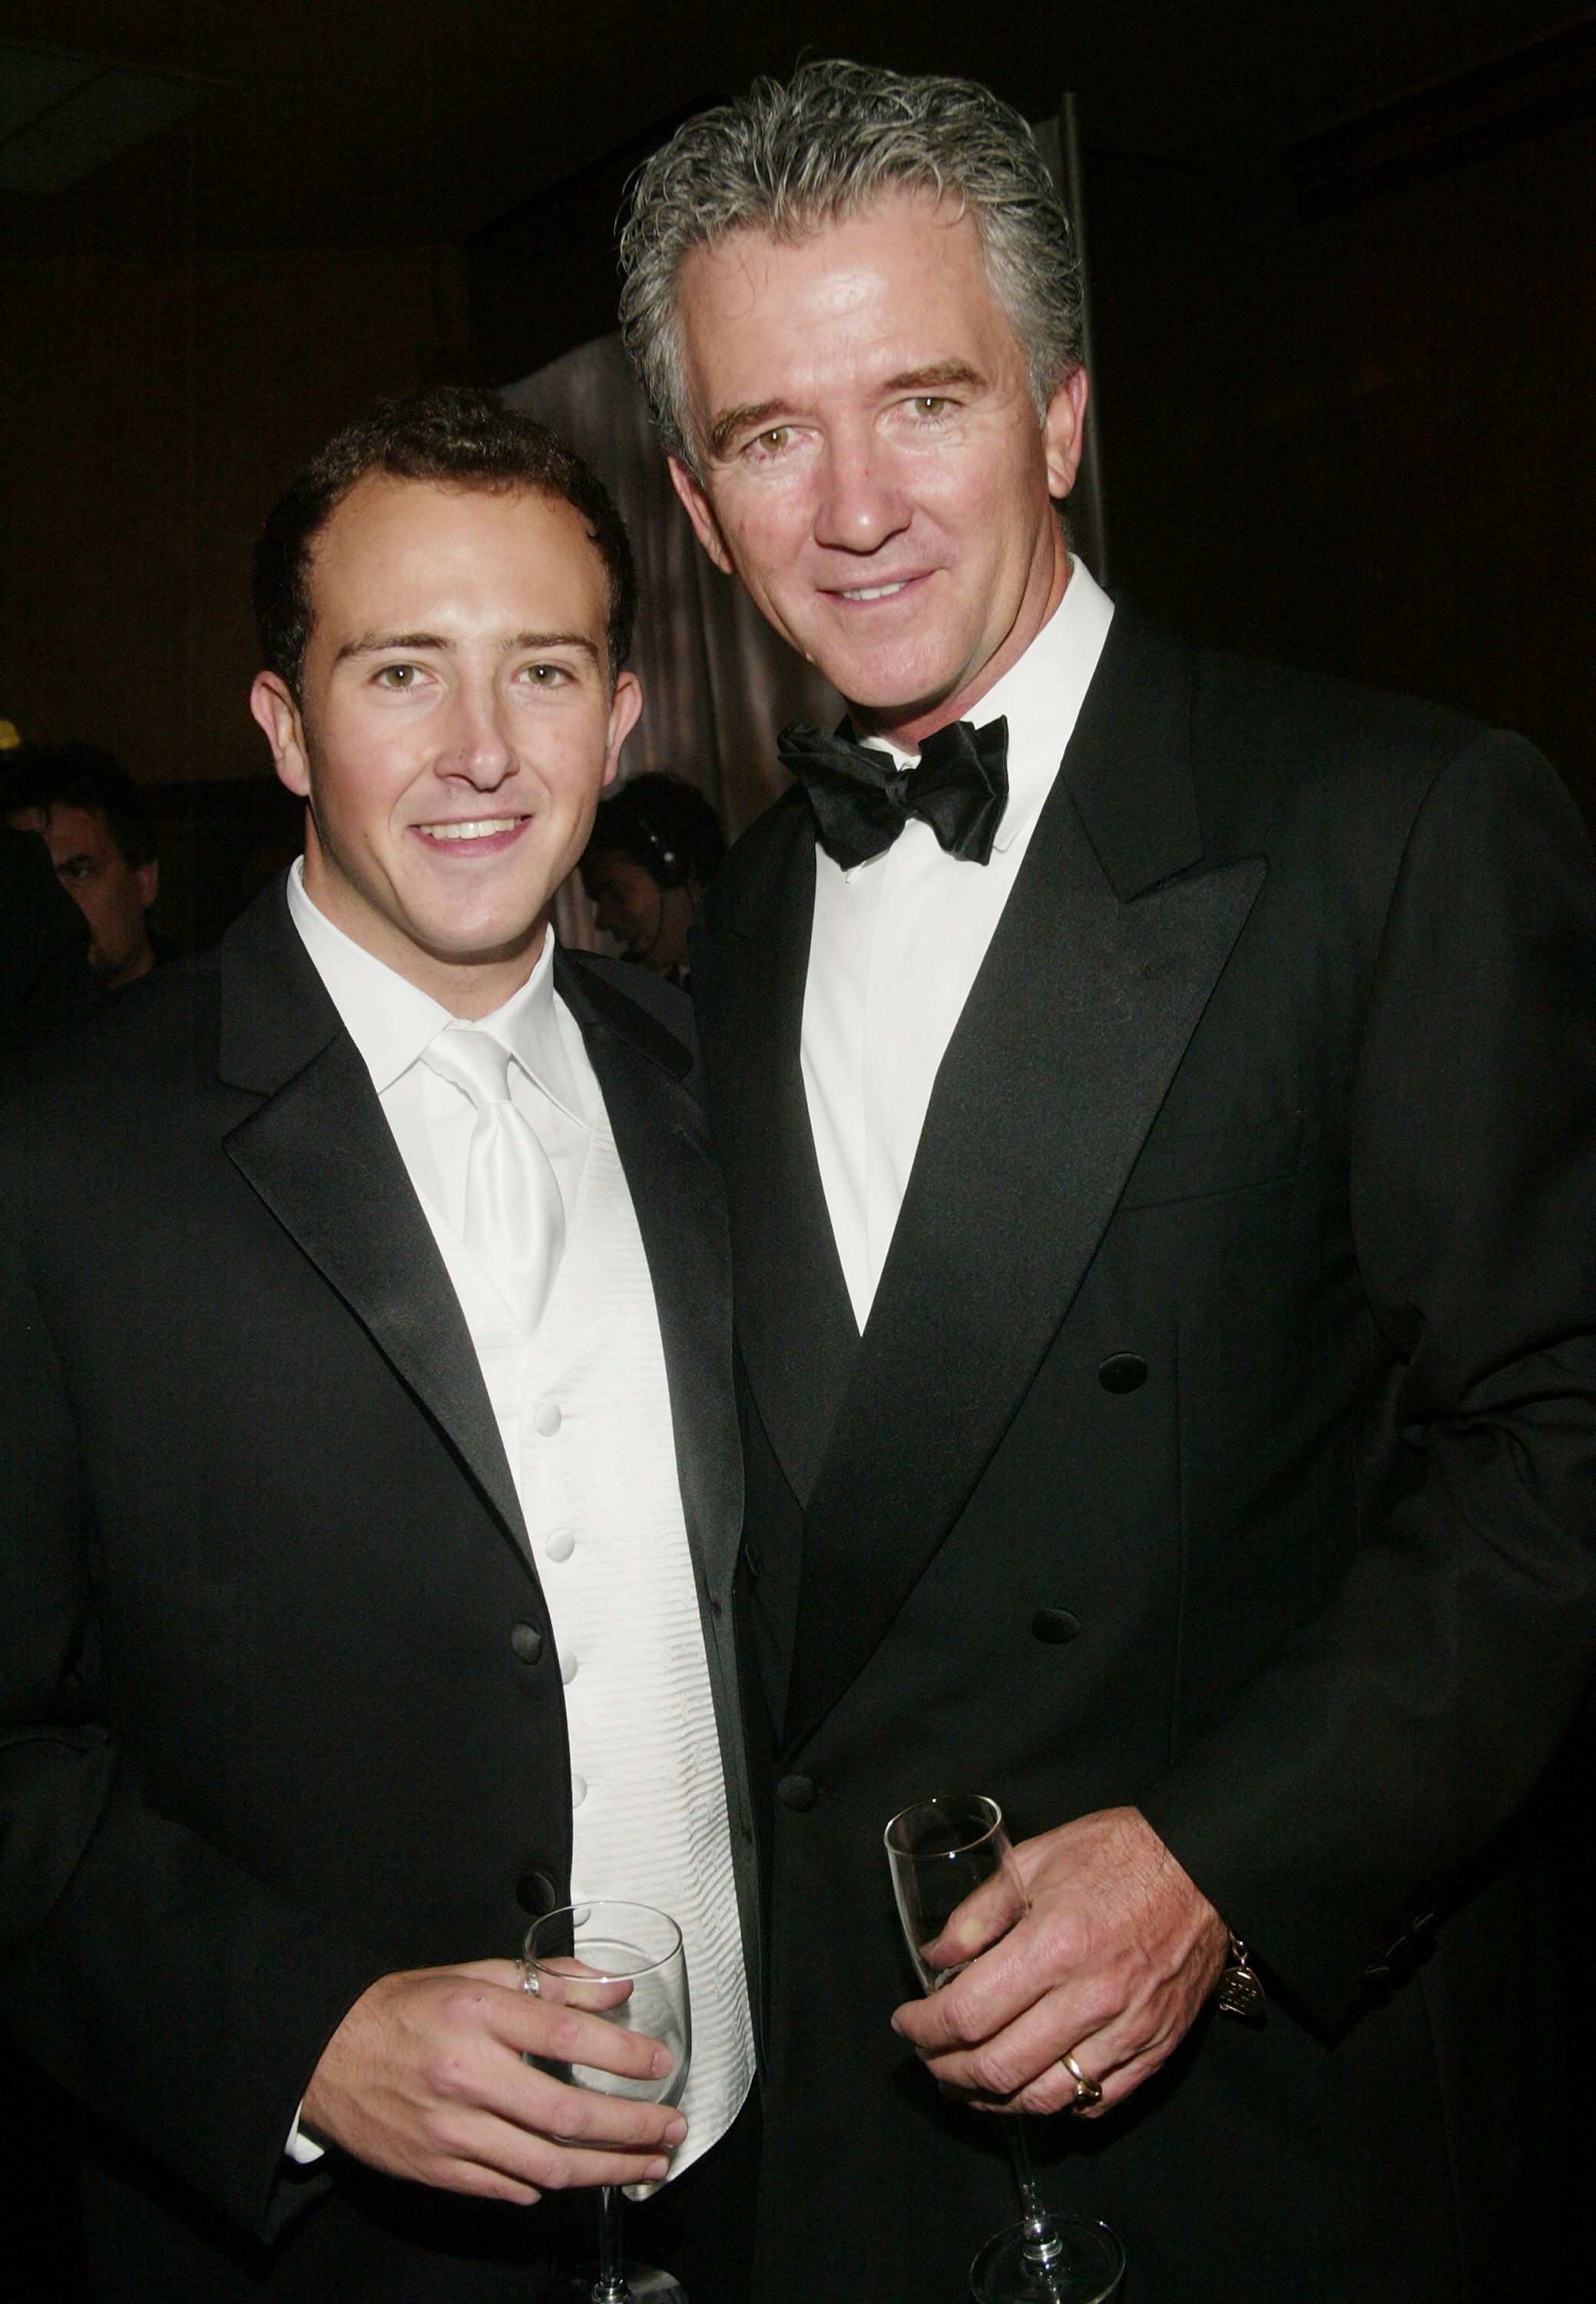 Patrick Duffy and his son Conor attend the cocktail party of the "CBS at 75" television gala at the Hammerstein Ballroom on November 2, 2003 in New York City.  |  Source: Getty Images